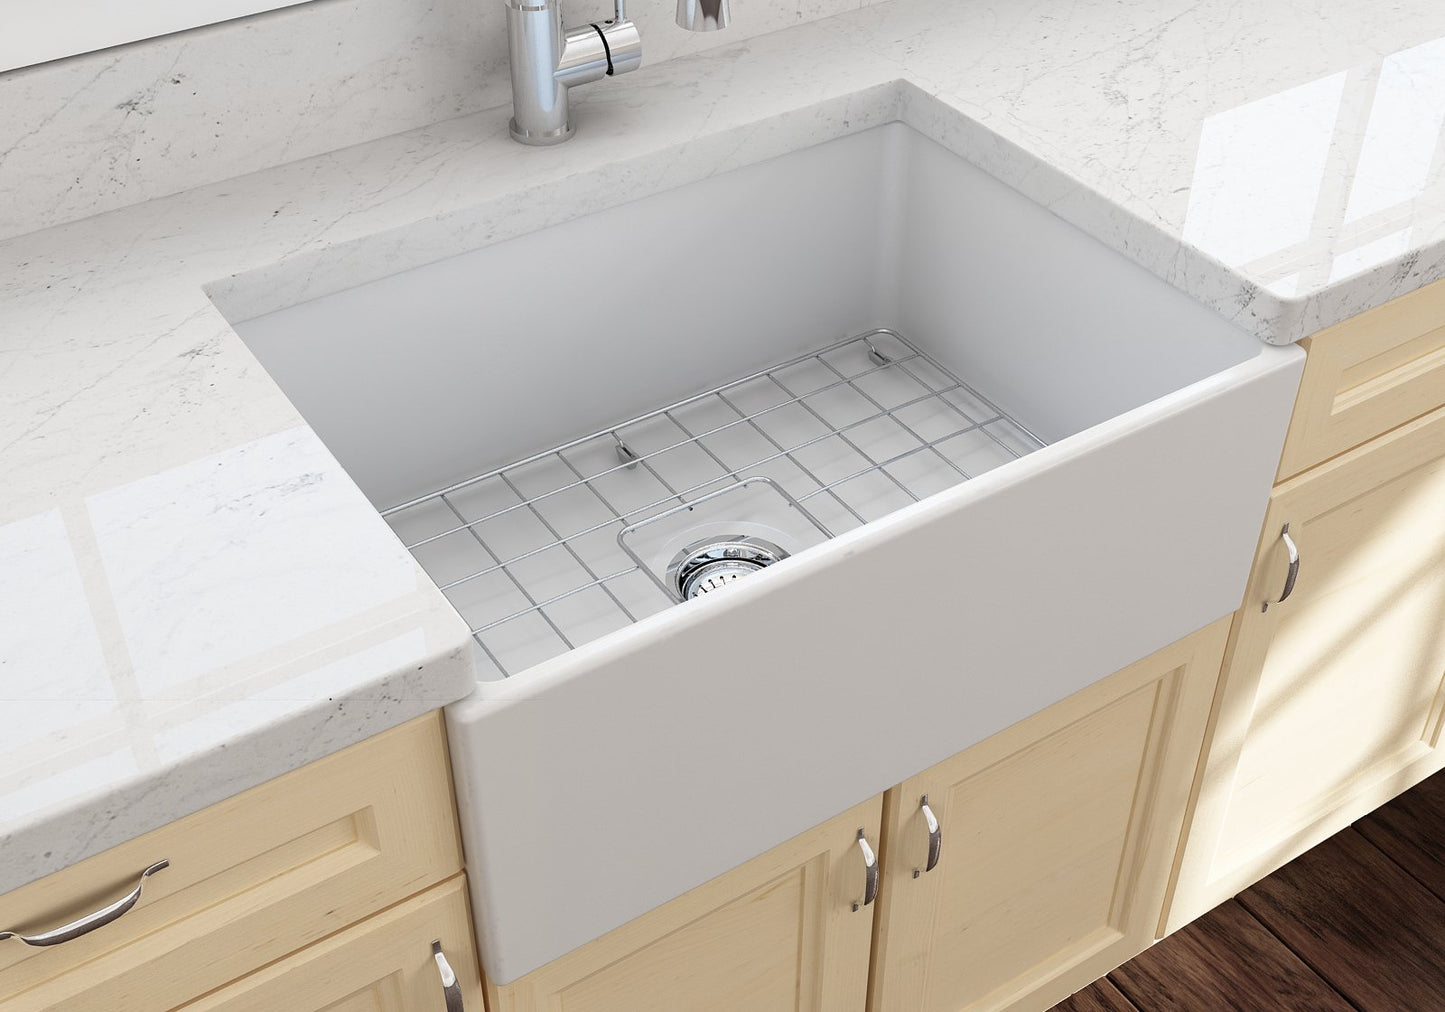 Bocchi Farmhouse Apron Front Fireclay 27" Single Bowl Kitchen Sink (Call for special pricing)